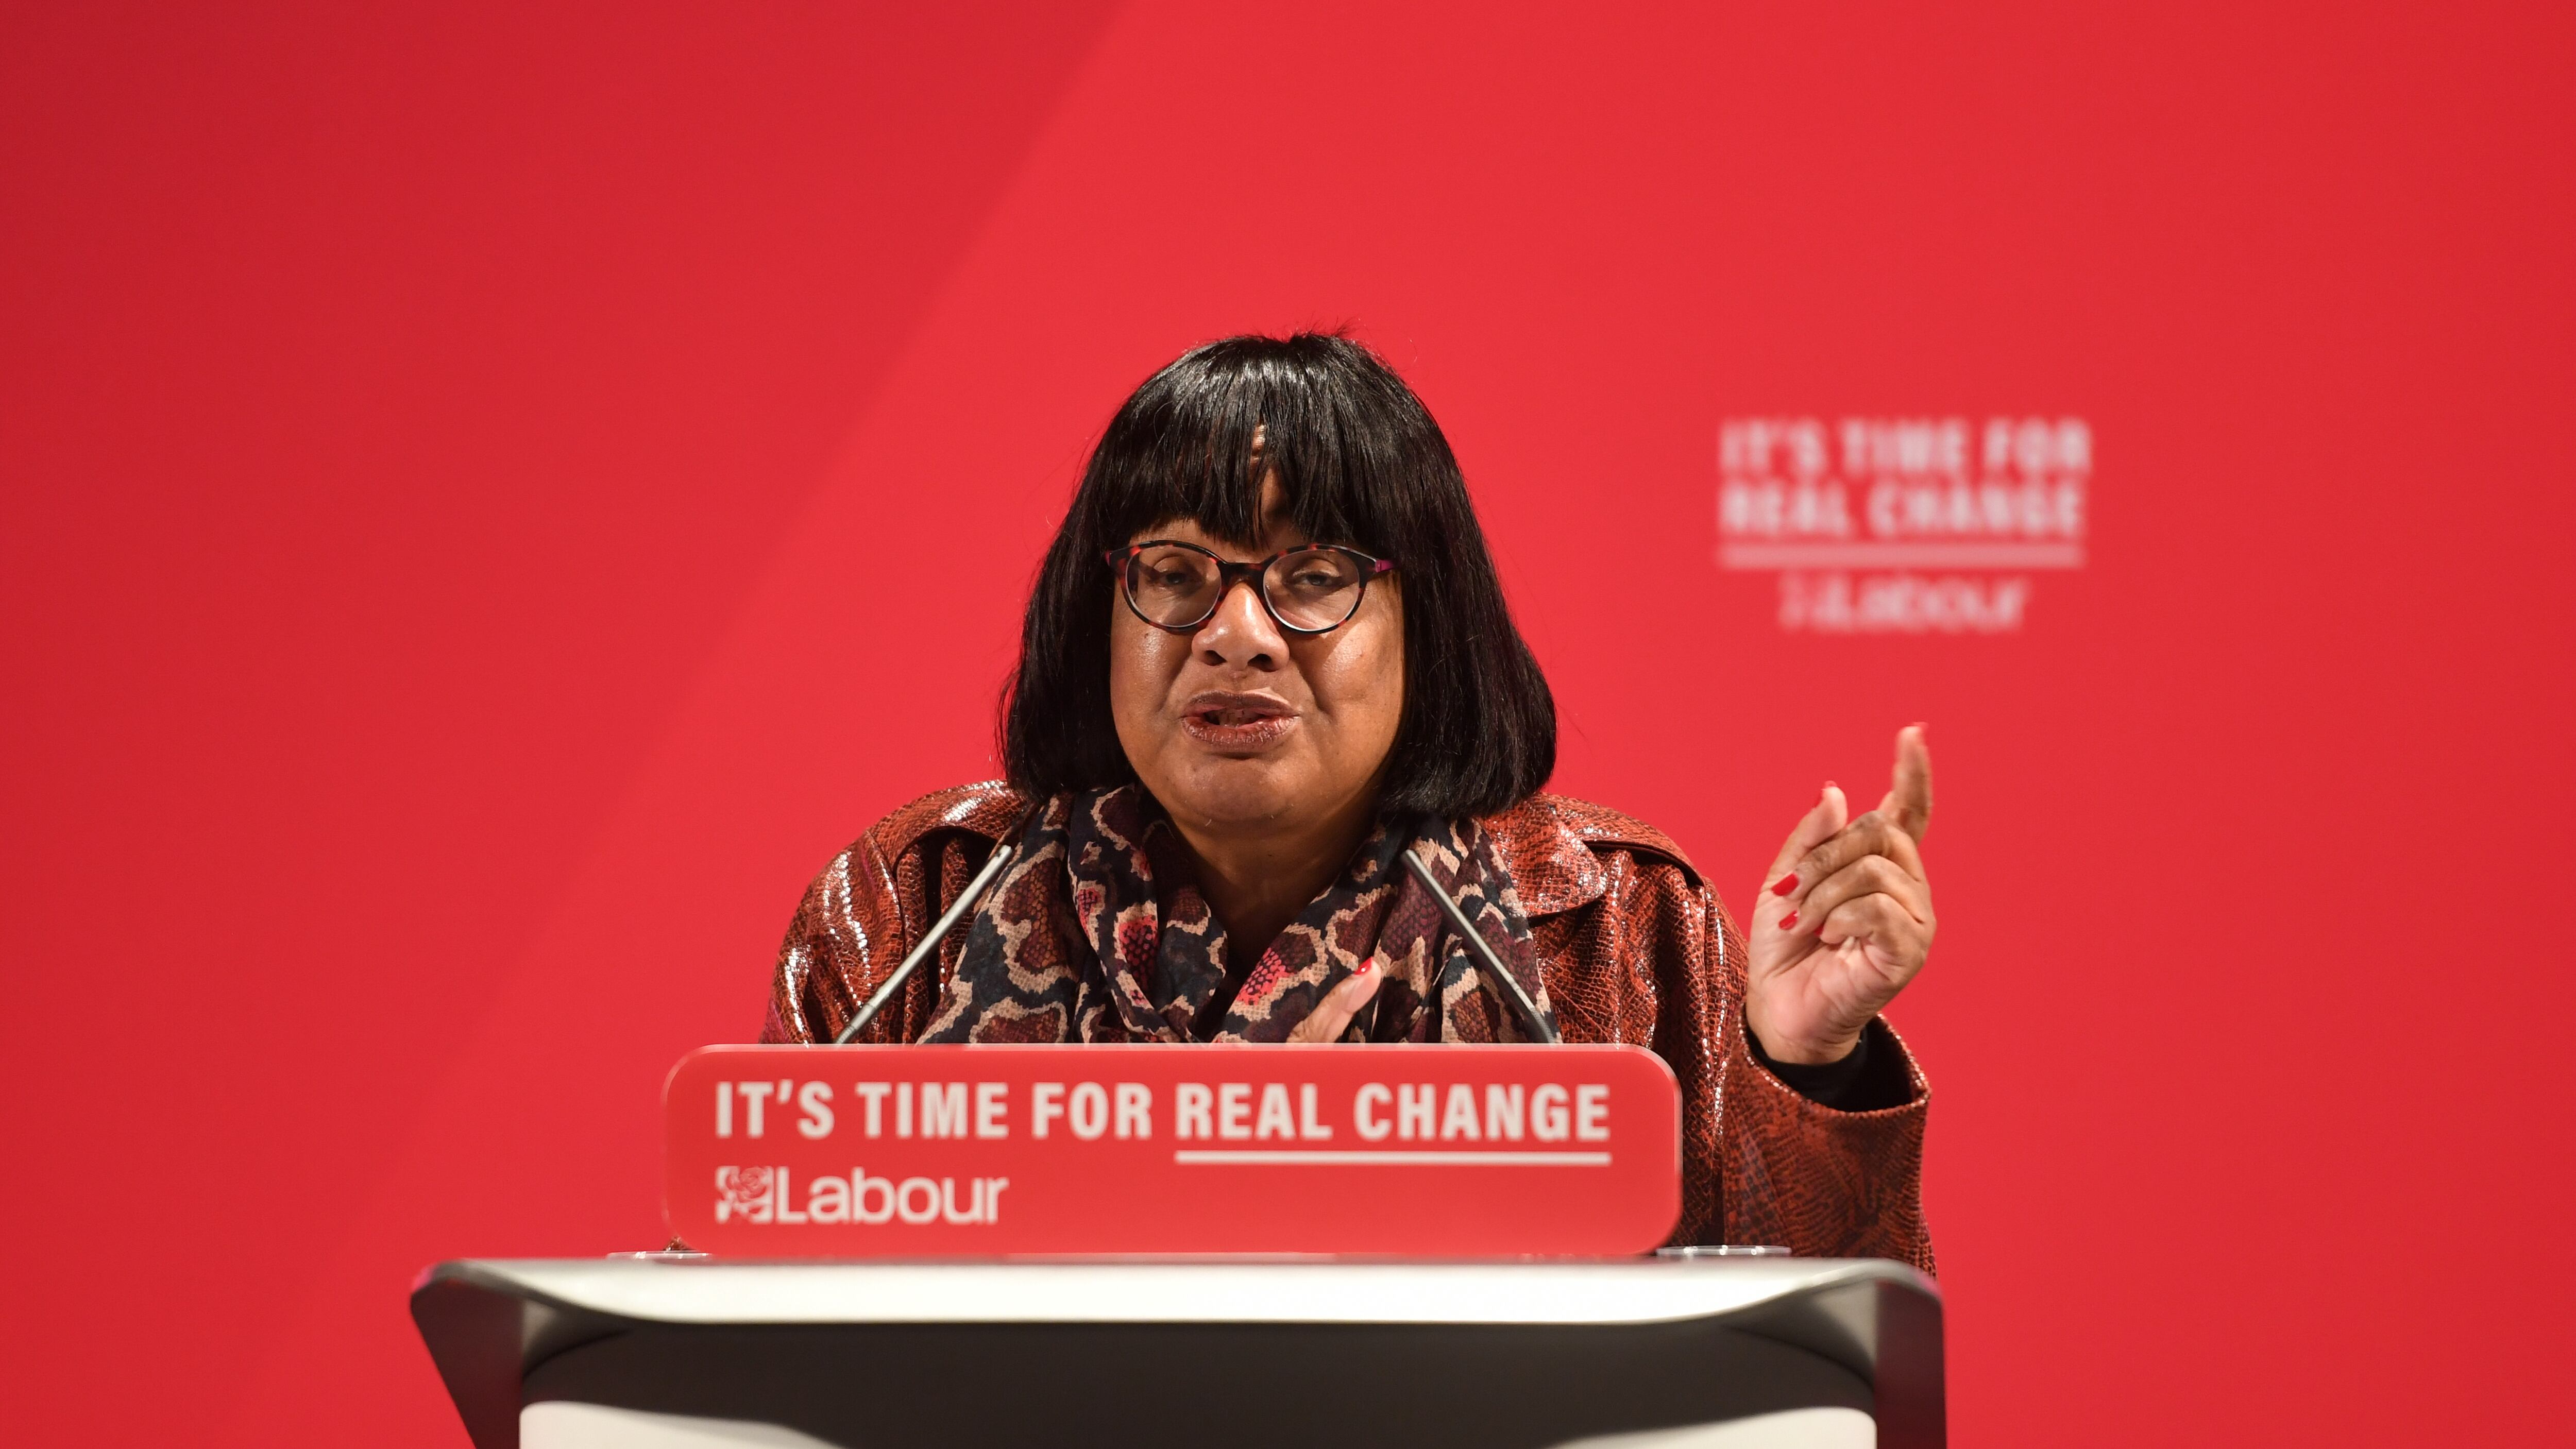 Diane Abbott has said she intends to ‘run and win’ as a Labour candidate